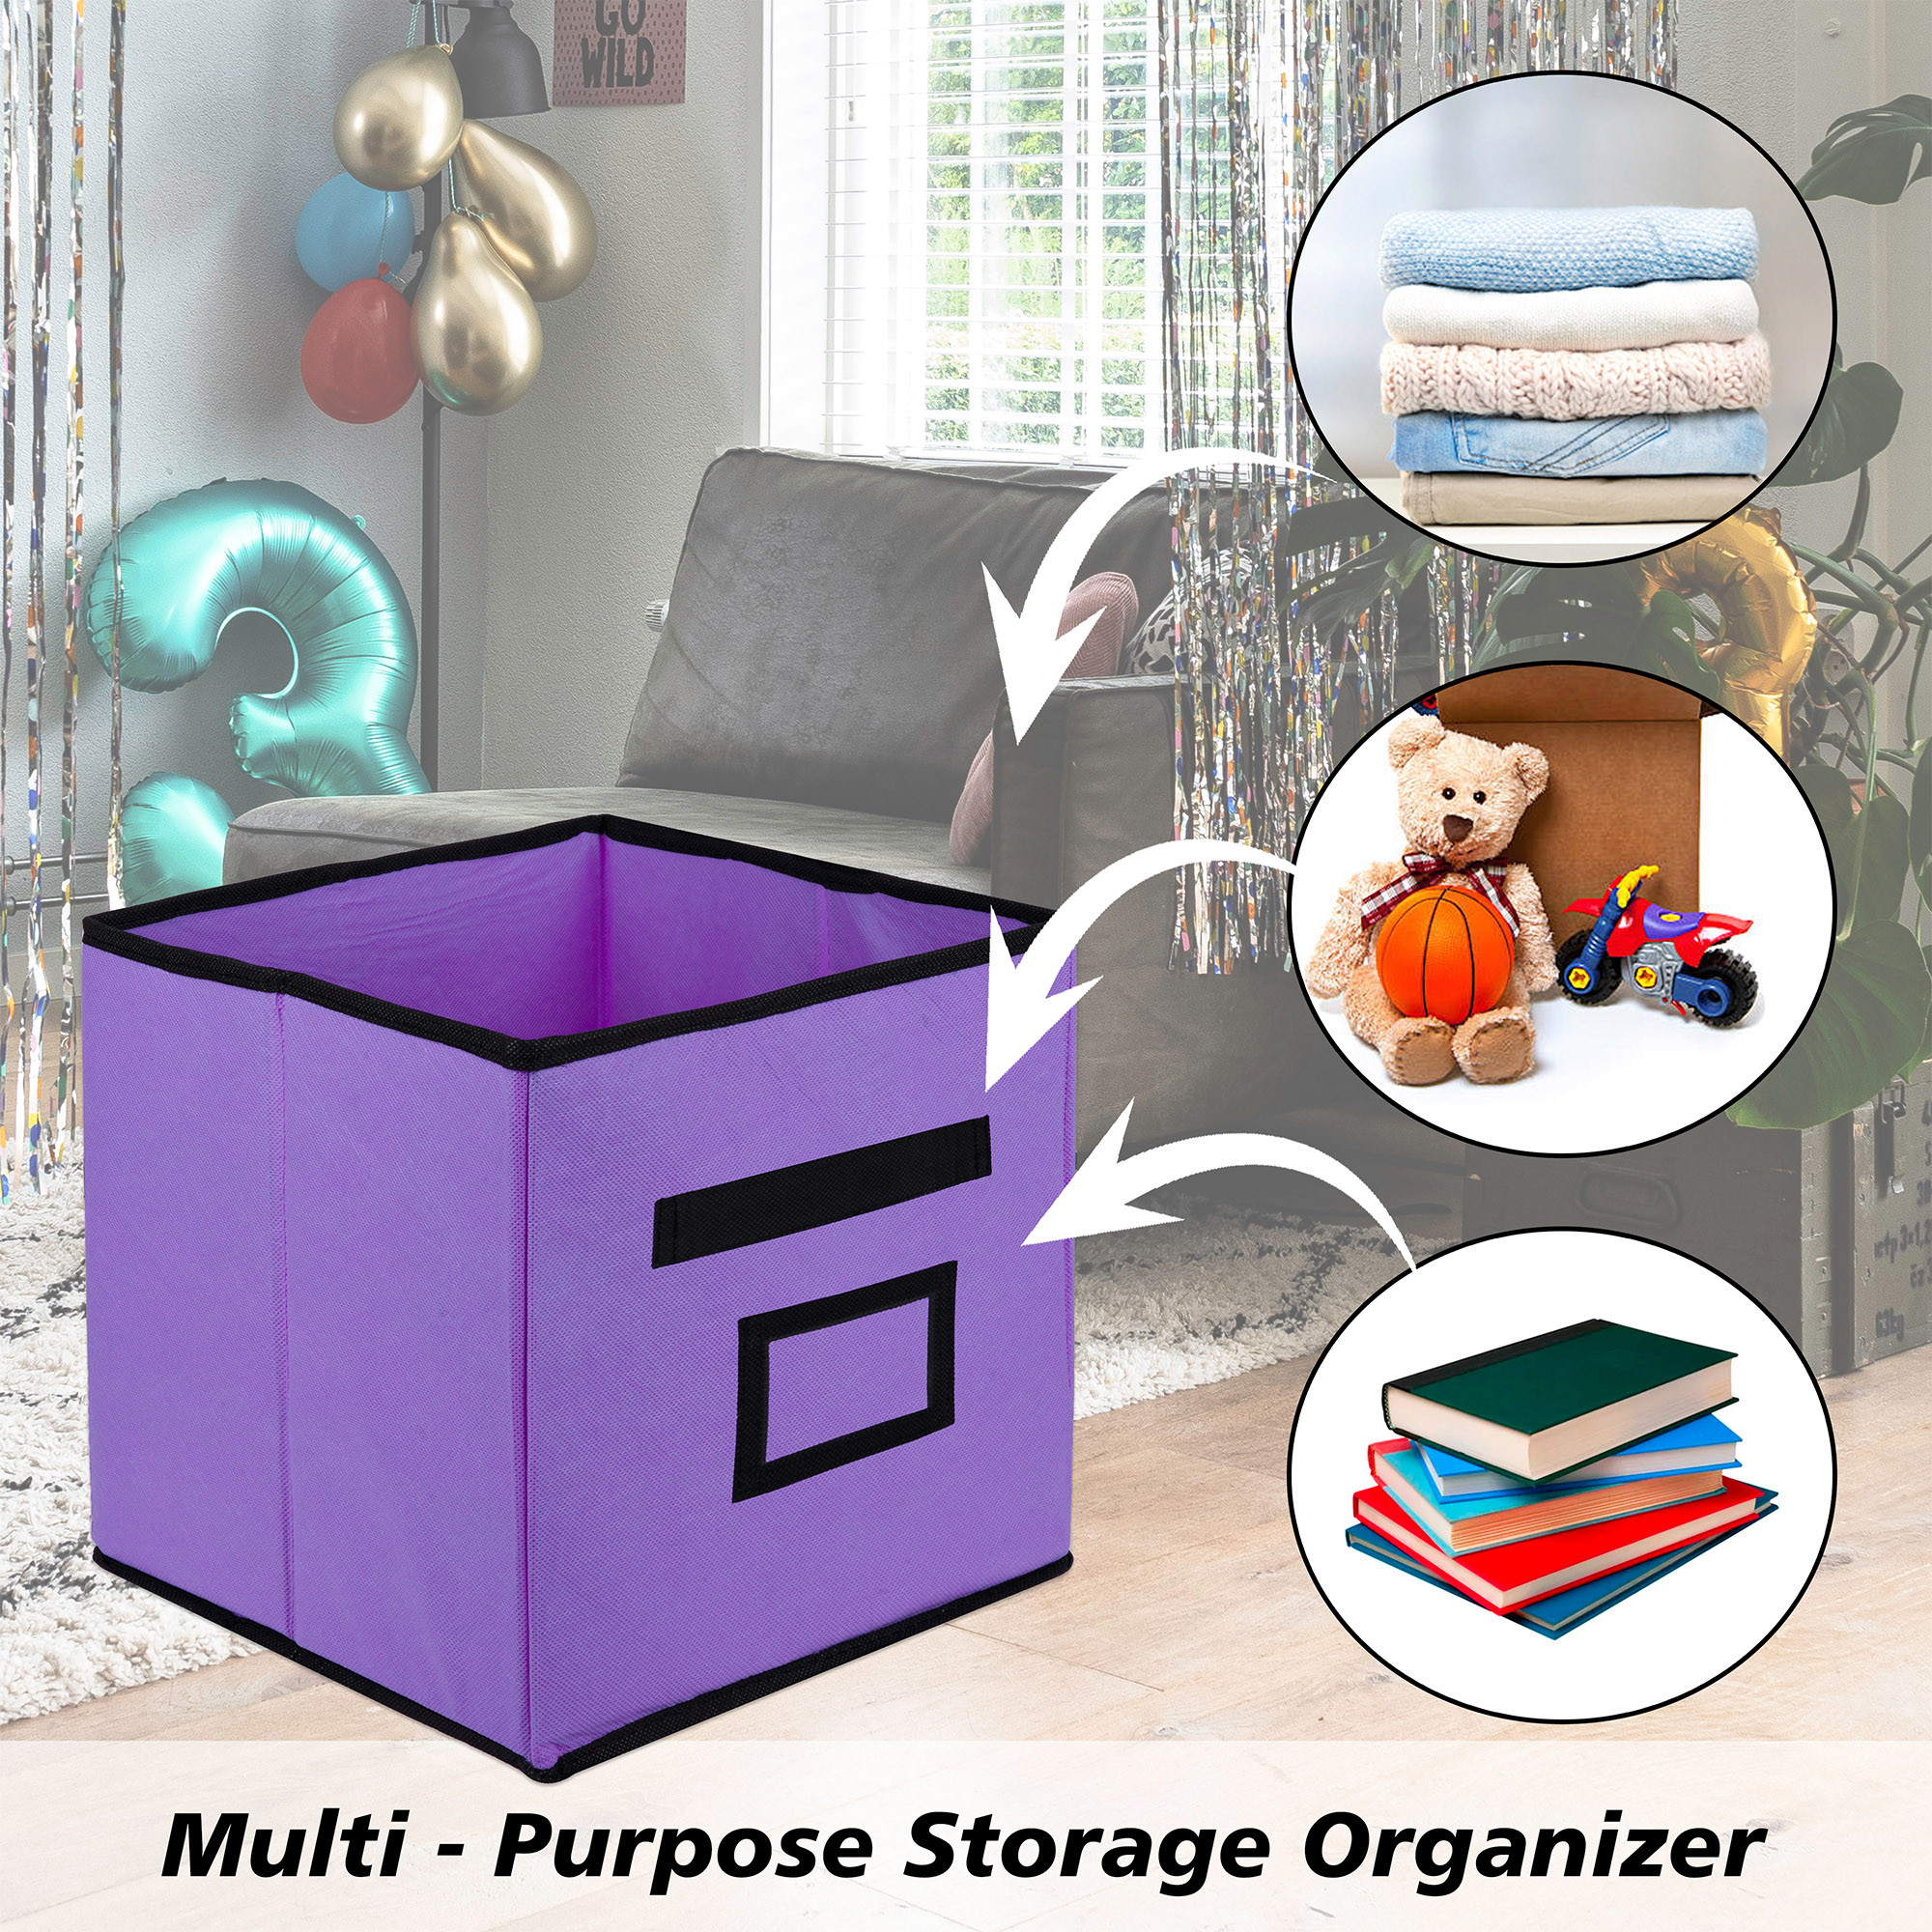 Kuber Industries Storage Box | Square Toy Storage Box | Wardrobe Organizer for Clothes-Books-Toys-Stationary | Drawer Organizer Box with Handle & Name Pocket | Purple & Brown